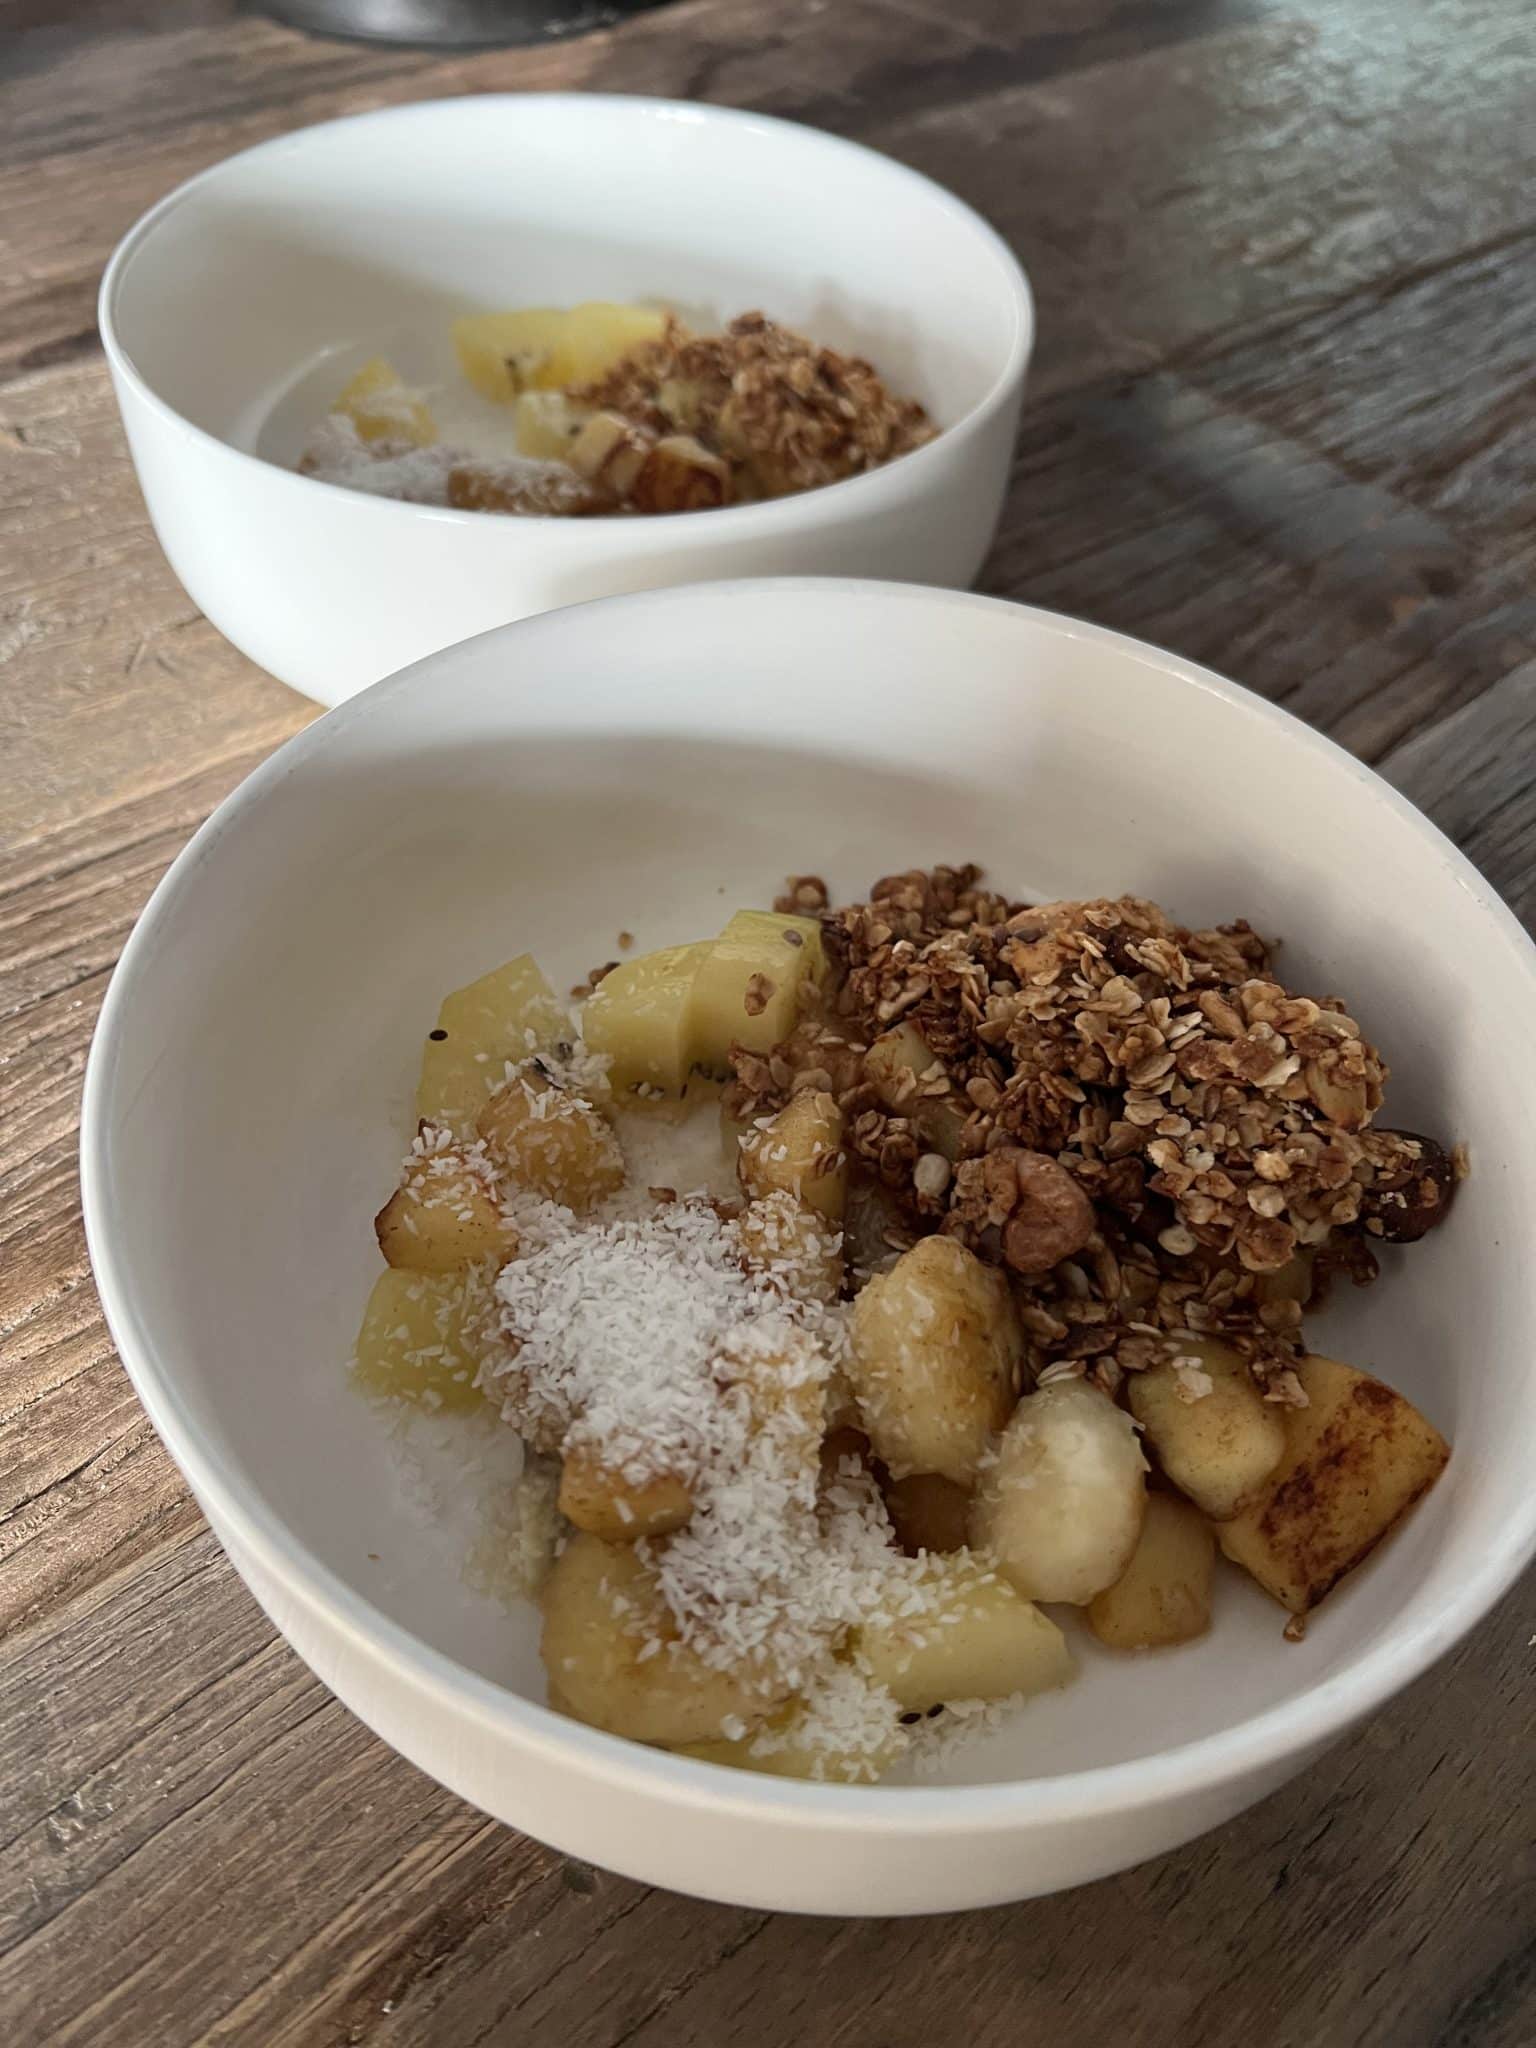 Our favorite breakfast: fruit with granola